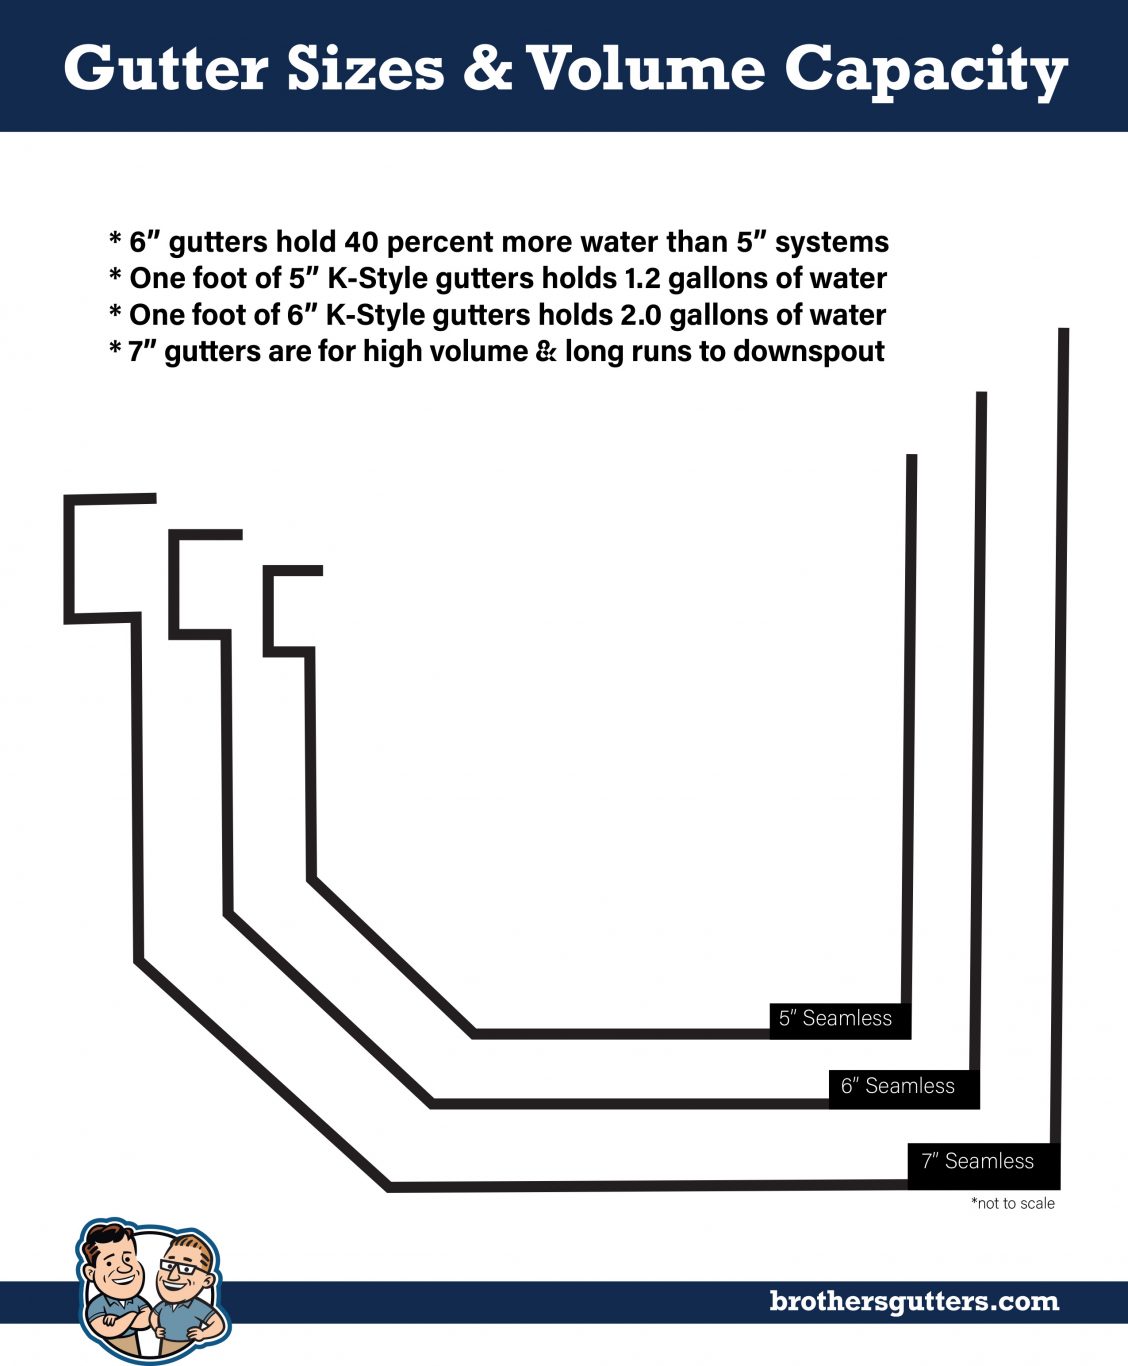 gutter sizes and volume capacity chart